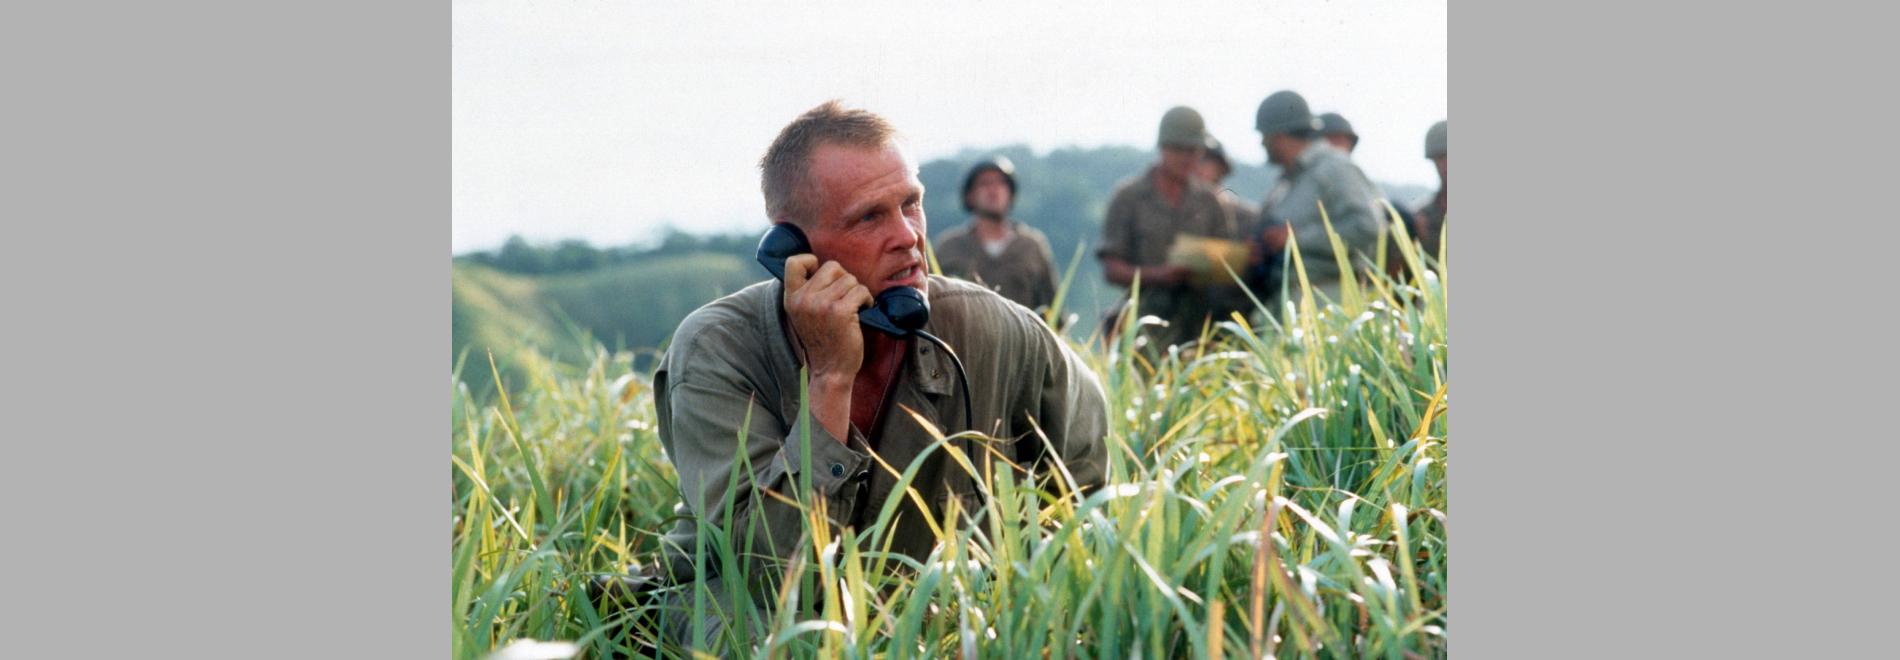 The Thin Red Line (Terrence Malick, 1998)